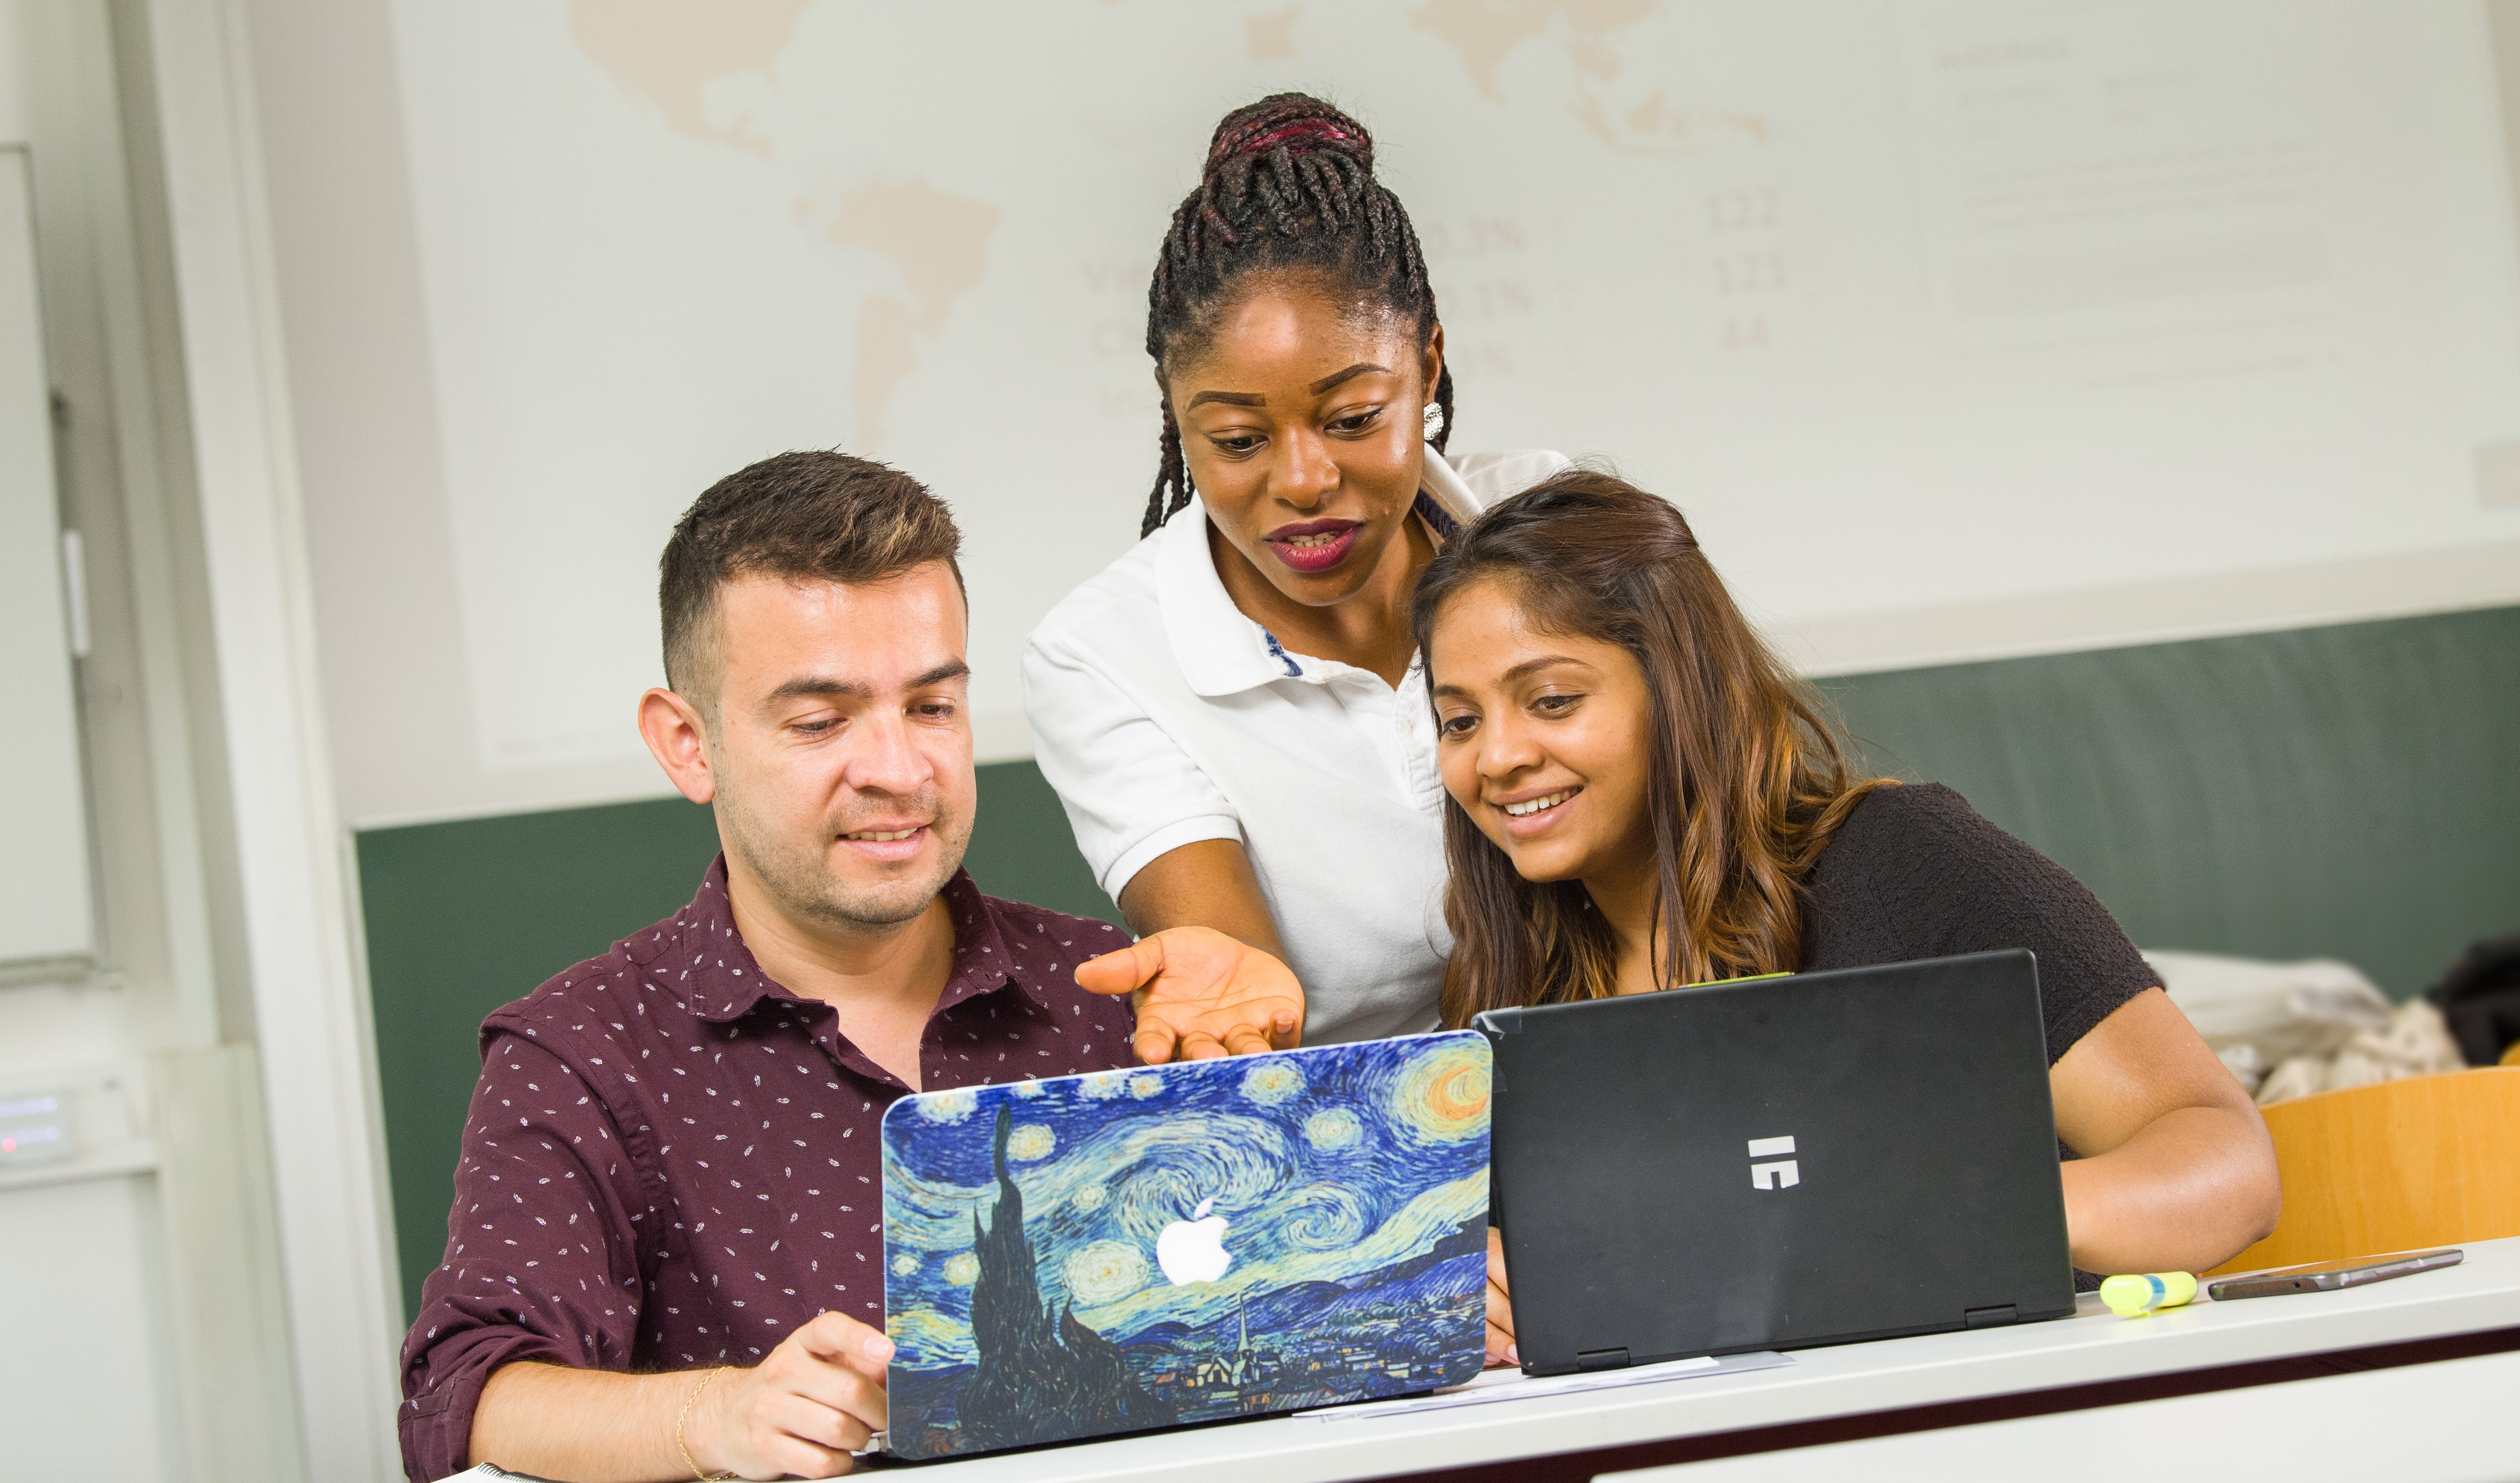 Three international students discuss a topic in front of their laptops